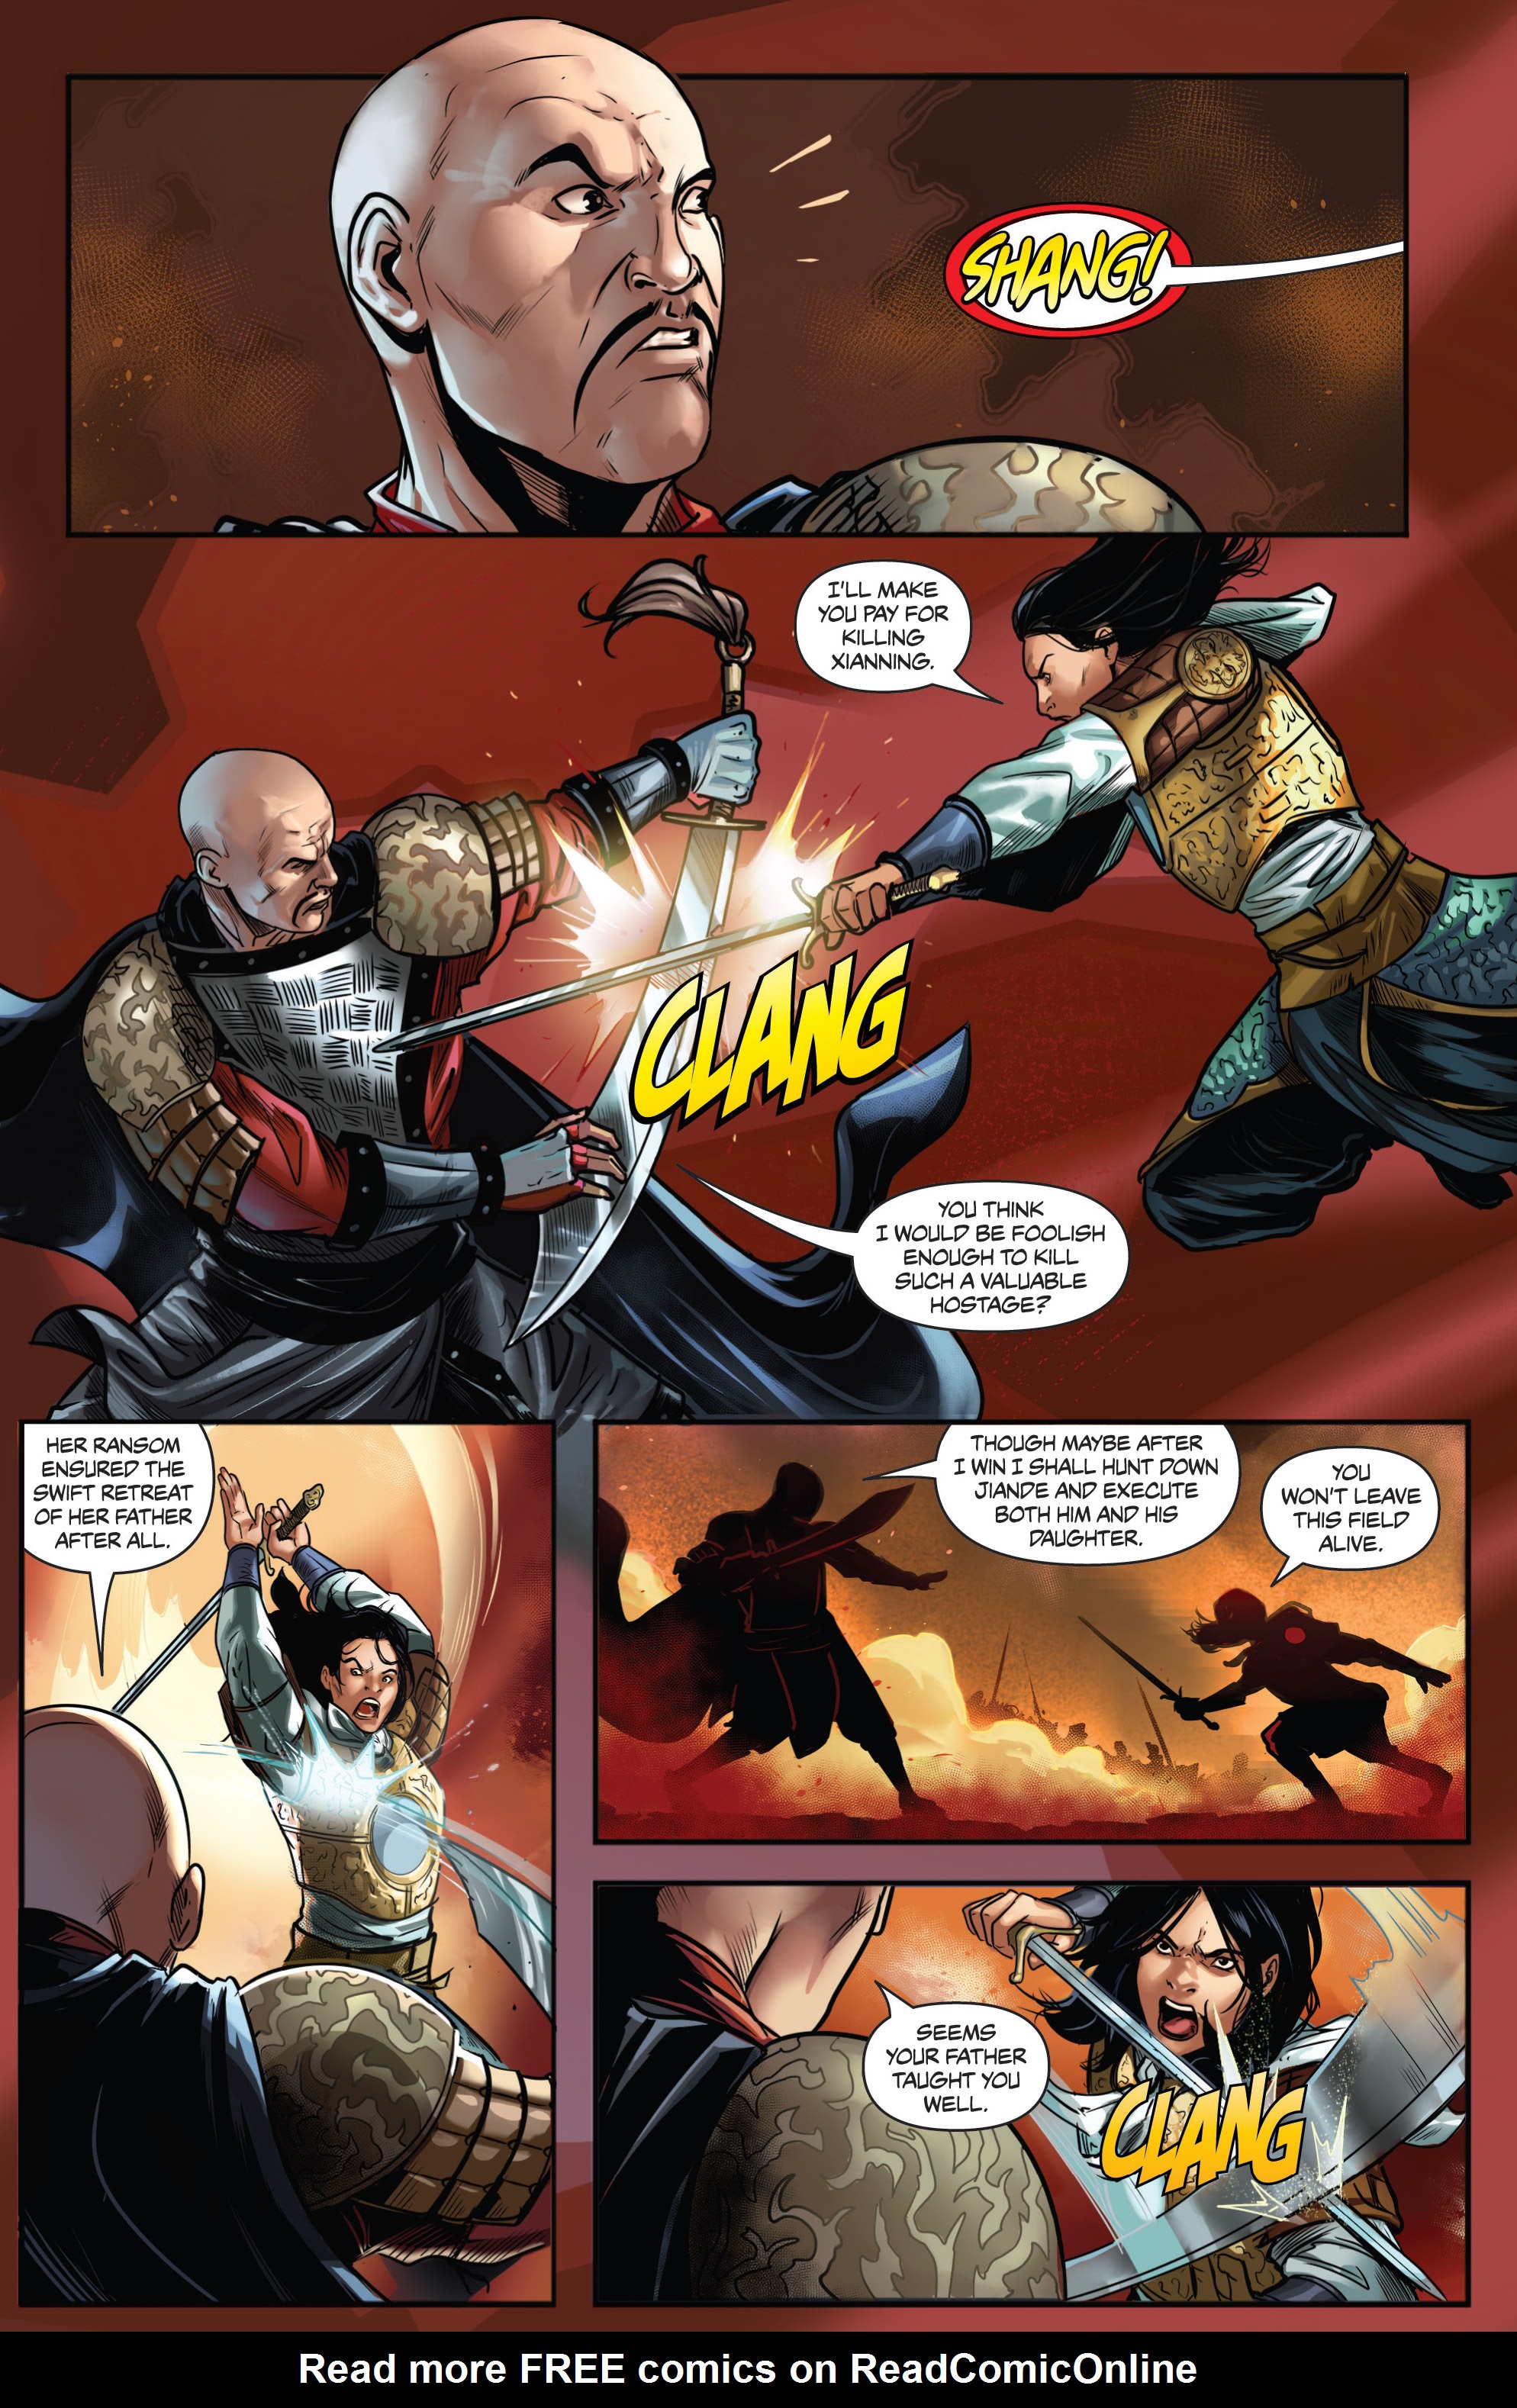 Read online Shang comic -  Issue #1 - 25